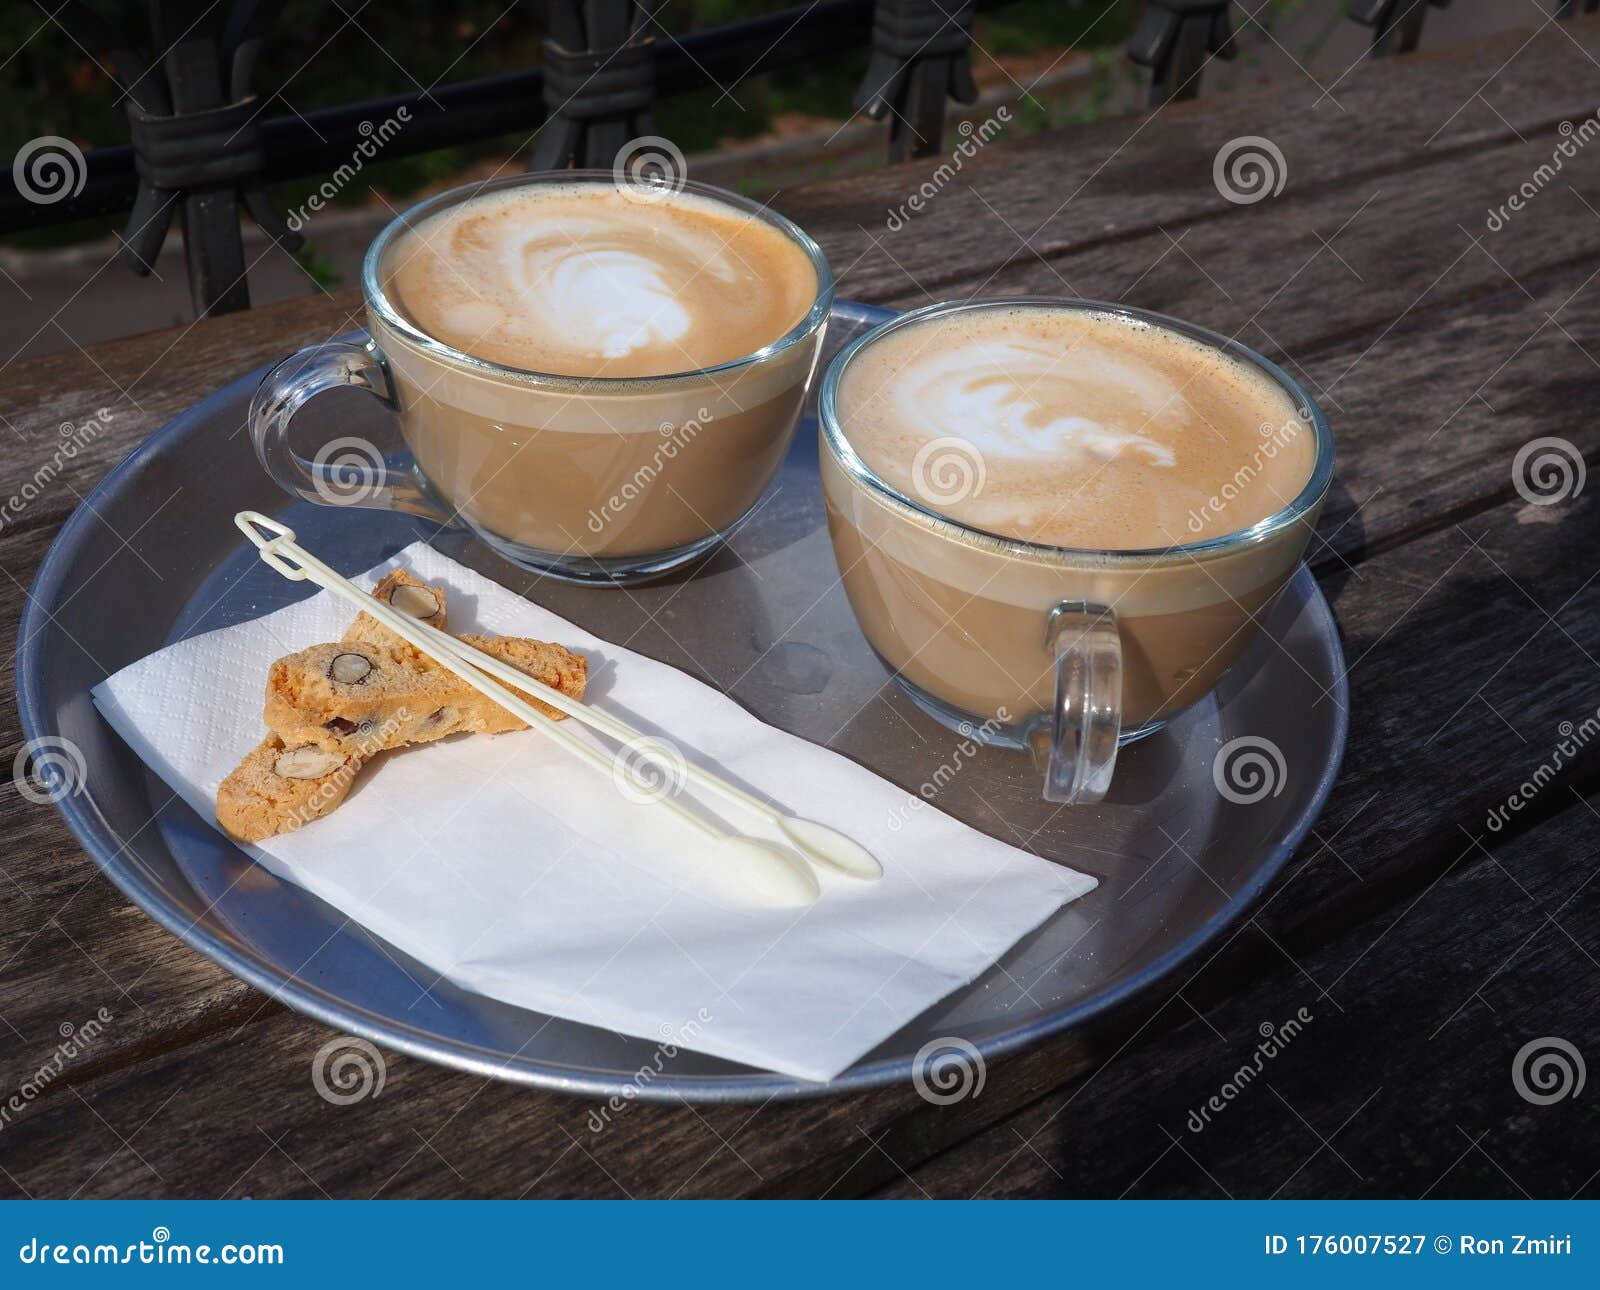 cups of fresh cappuccino coffee latte served with coockies